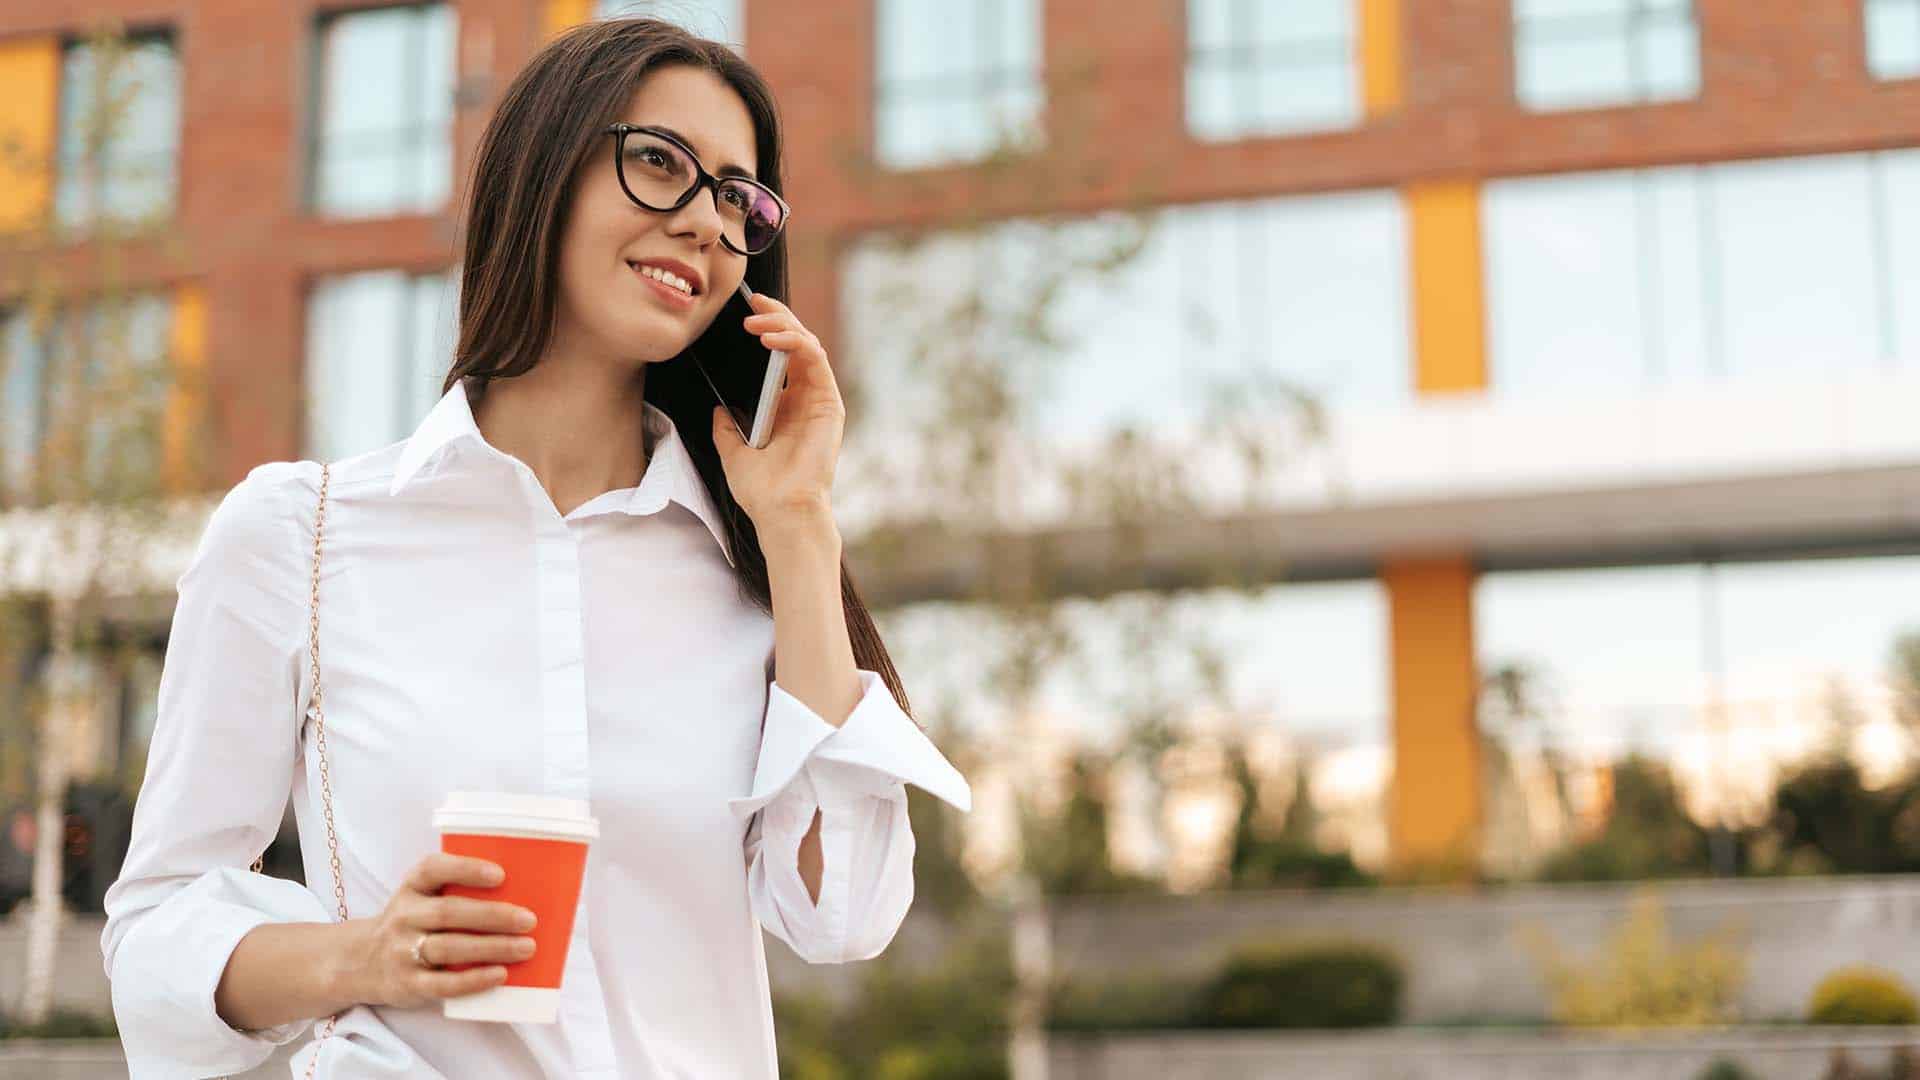 Photo showing a business woman using a mobile device outside conducting a business call